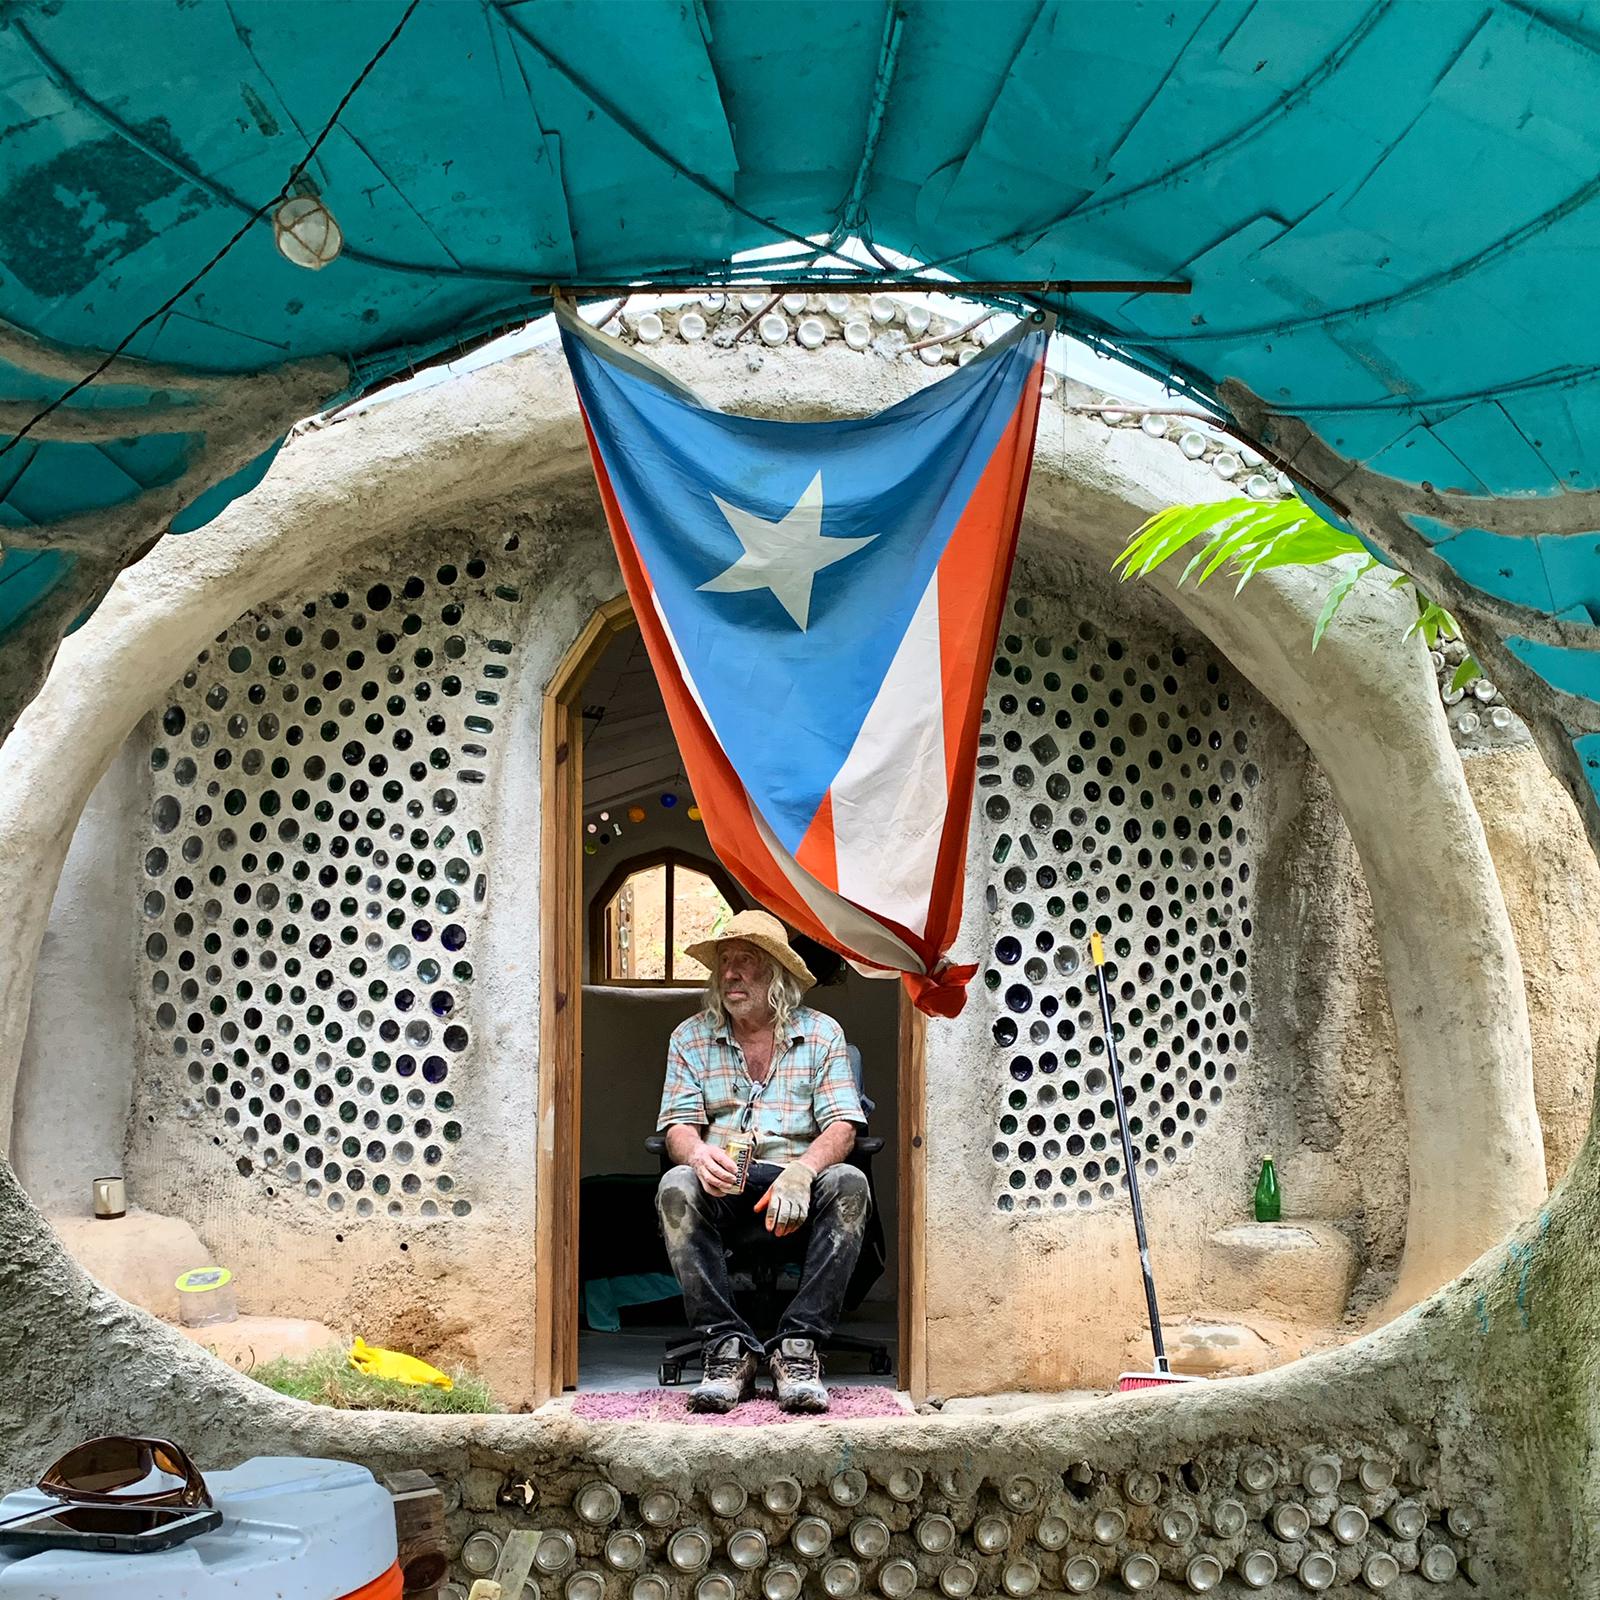 Michael Reynolds sits inside an earthship - an off-grid home made entirely from recycled materials.